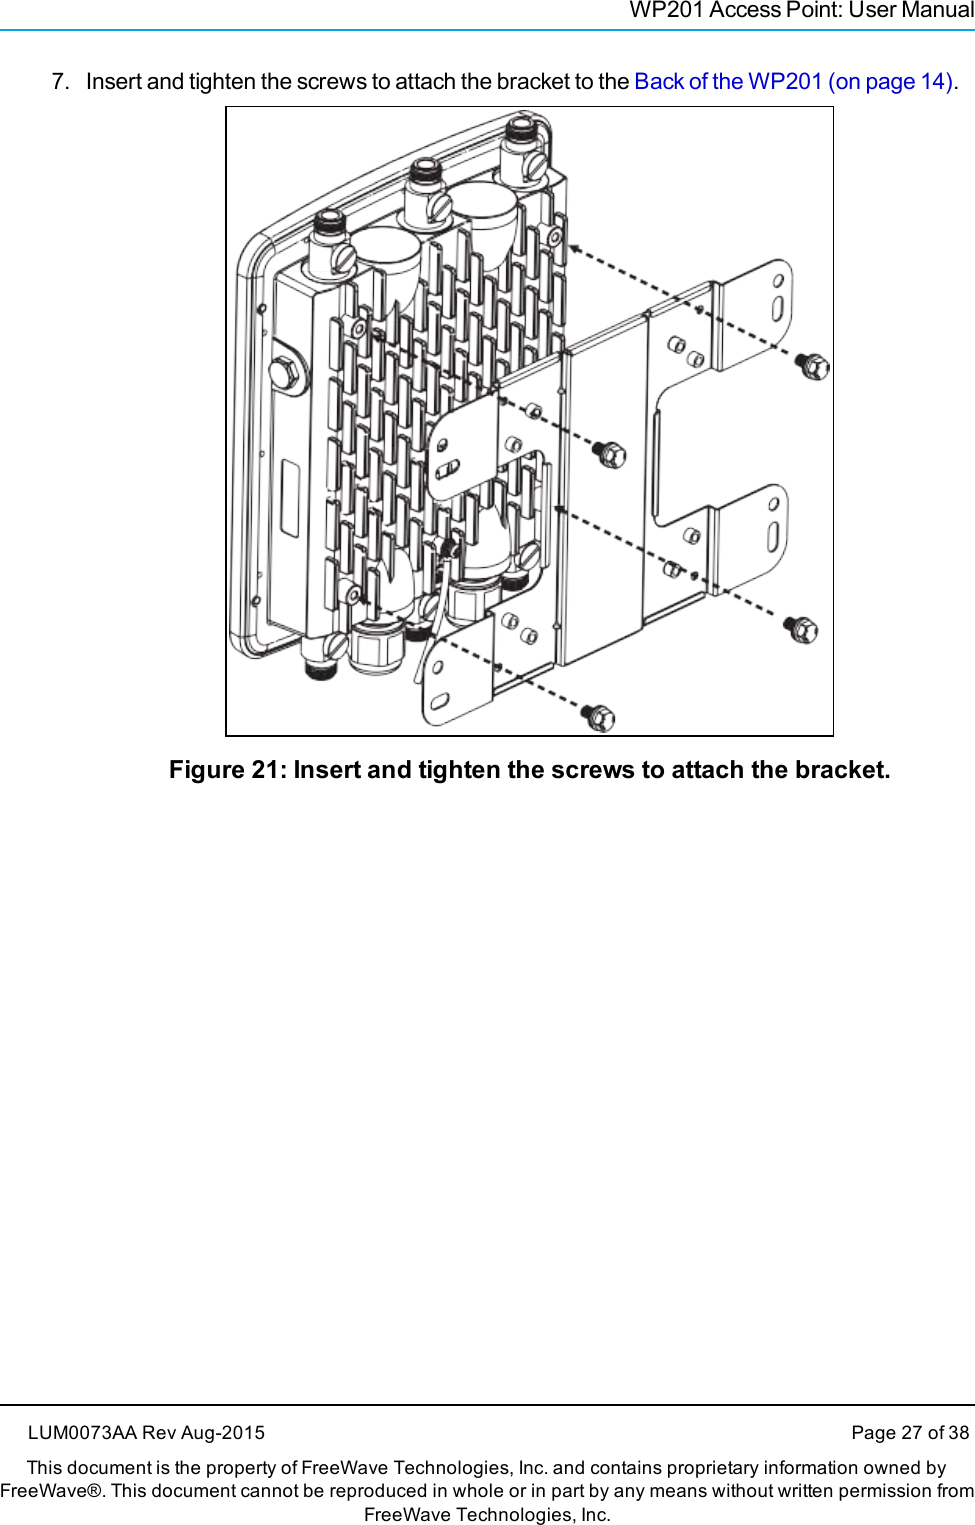 WP201 Access Point: User Manual7. Insert and tighten the screws to attach the bracket to the Back of the WP201 (on page 14).Figure 21: Insert and tighten the screws to attach the bracket.LUM0073AA Rev Aug-2015 Page 27 of 38This document is the property of FreeWave Technologies, Inc. and contains proprietary information owned byFreeWave®. This document cannot be reproduced in whole or in part by any means without written permission fromFreeWave Technologies, Inc.